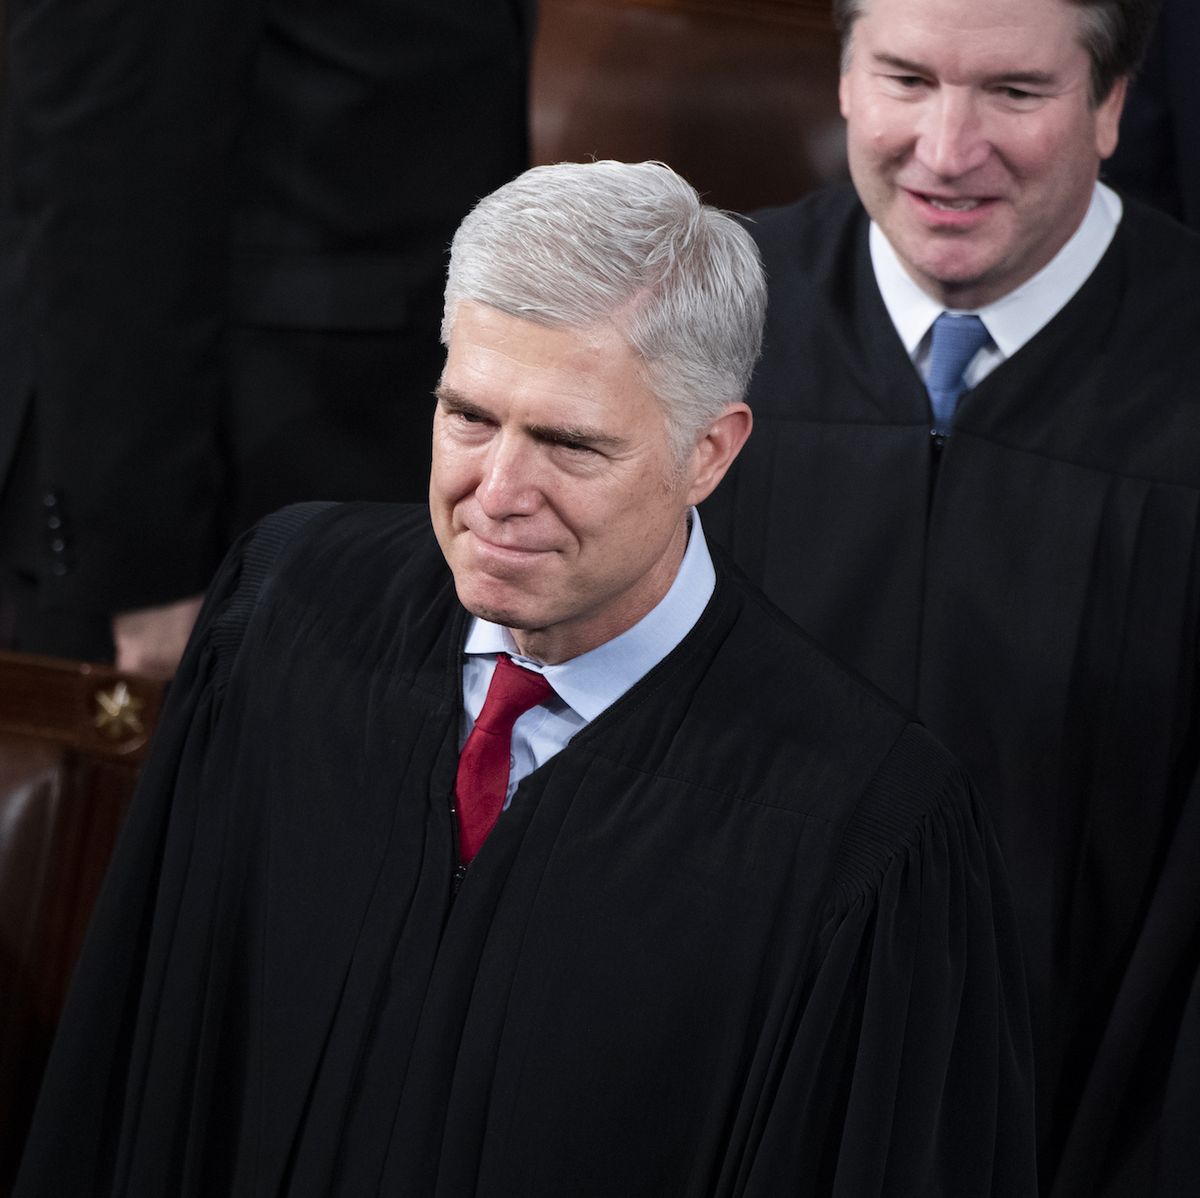 united states   february 04 supreme court justices neil gorsuch, left, and brett kavanaugh, are seen during president donald trump’s state of the union address in the house chamber on tuesday, february 4, 2020 photo by tom williamscq roll call